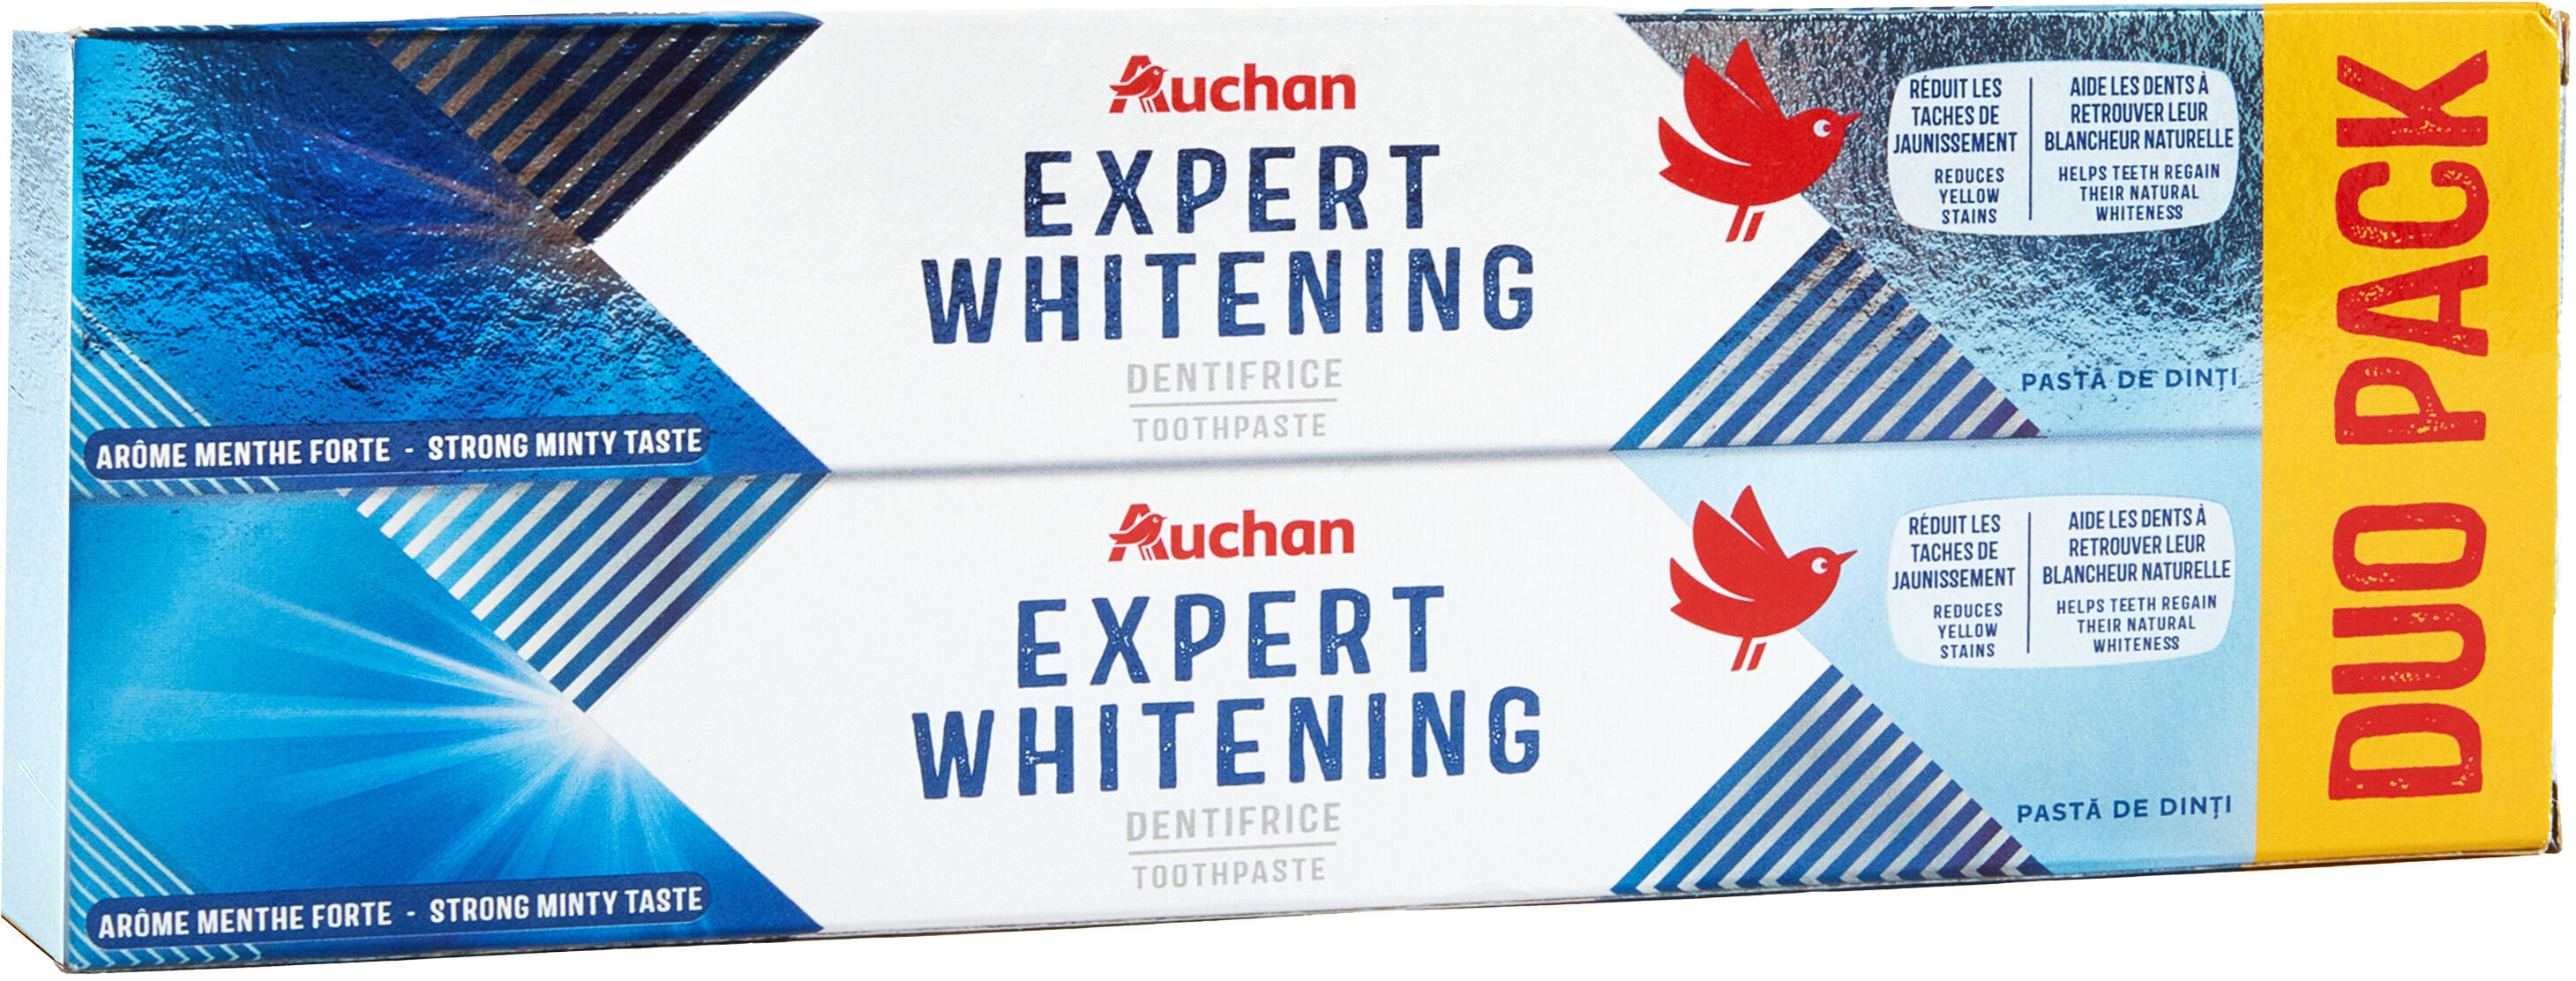 Dentifrice expert blancheur lot x2 - Product - fr